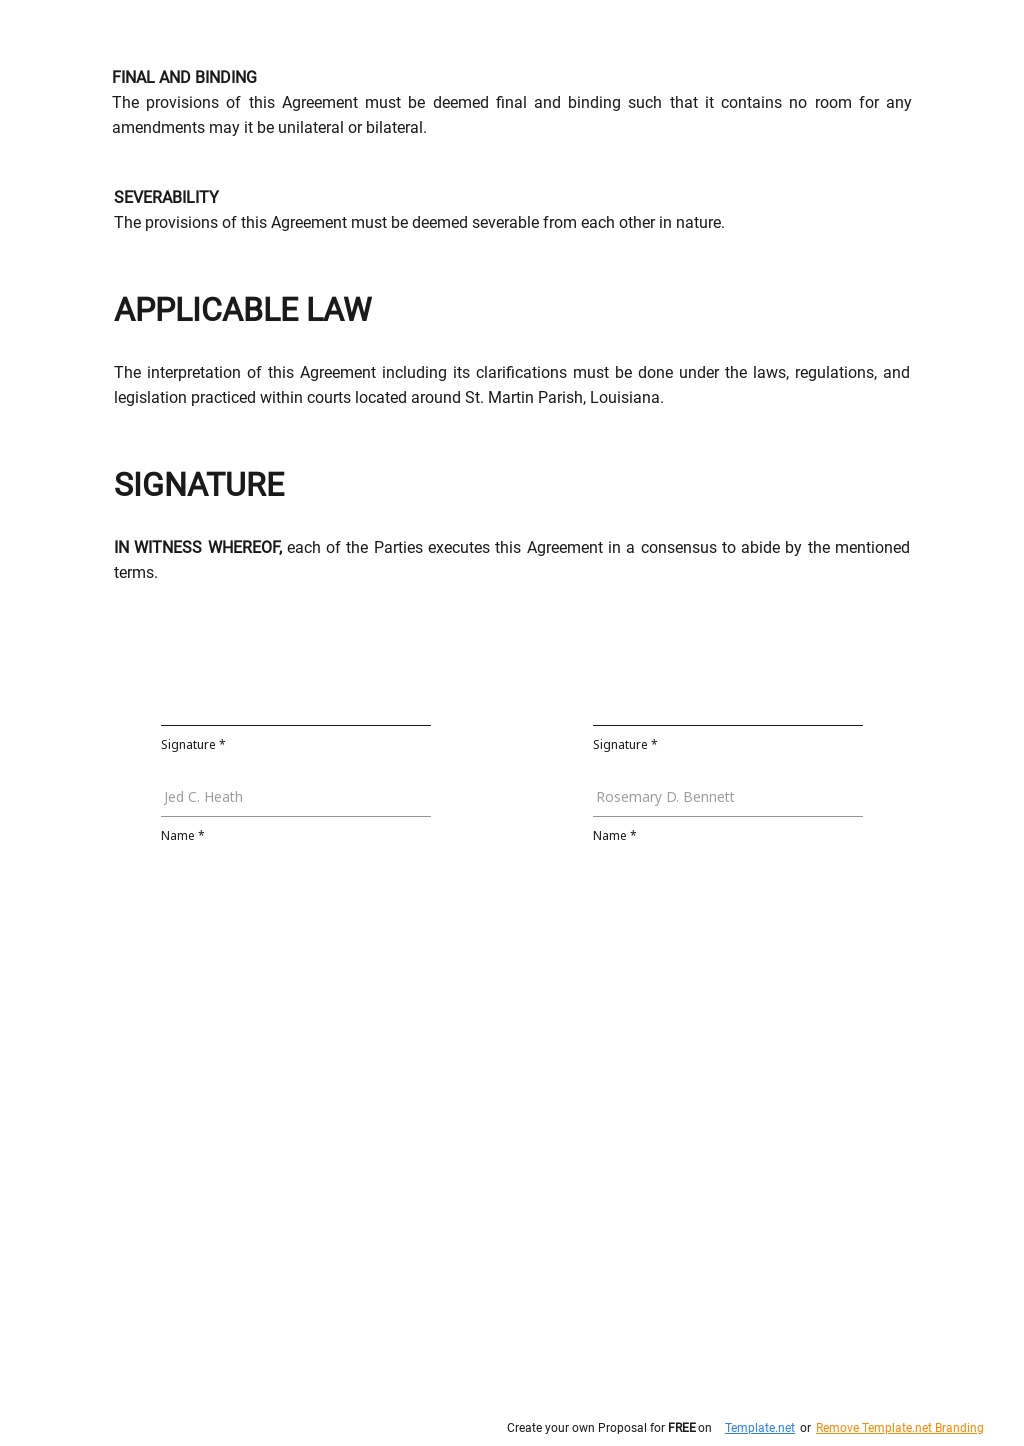 Individual Flexibility Agreement Template - Google Docs, Word Within individual flexibility agreement template